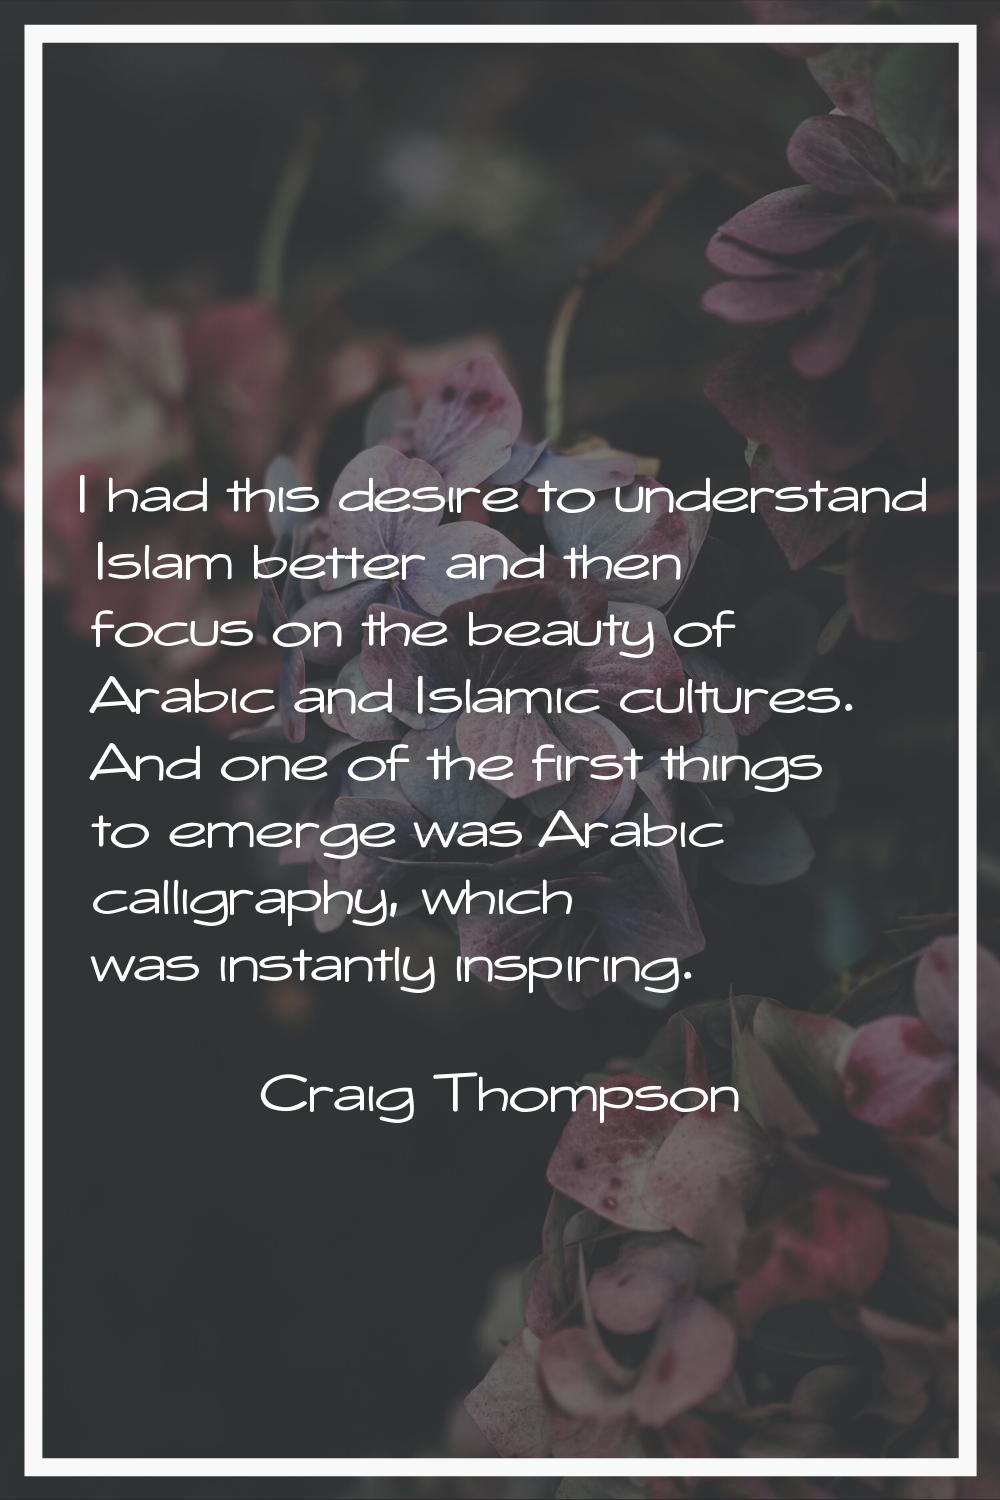 I had this desire to understand Islam better and then focus on the beauty of Arabic and Islamic cul